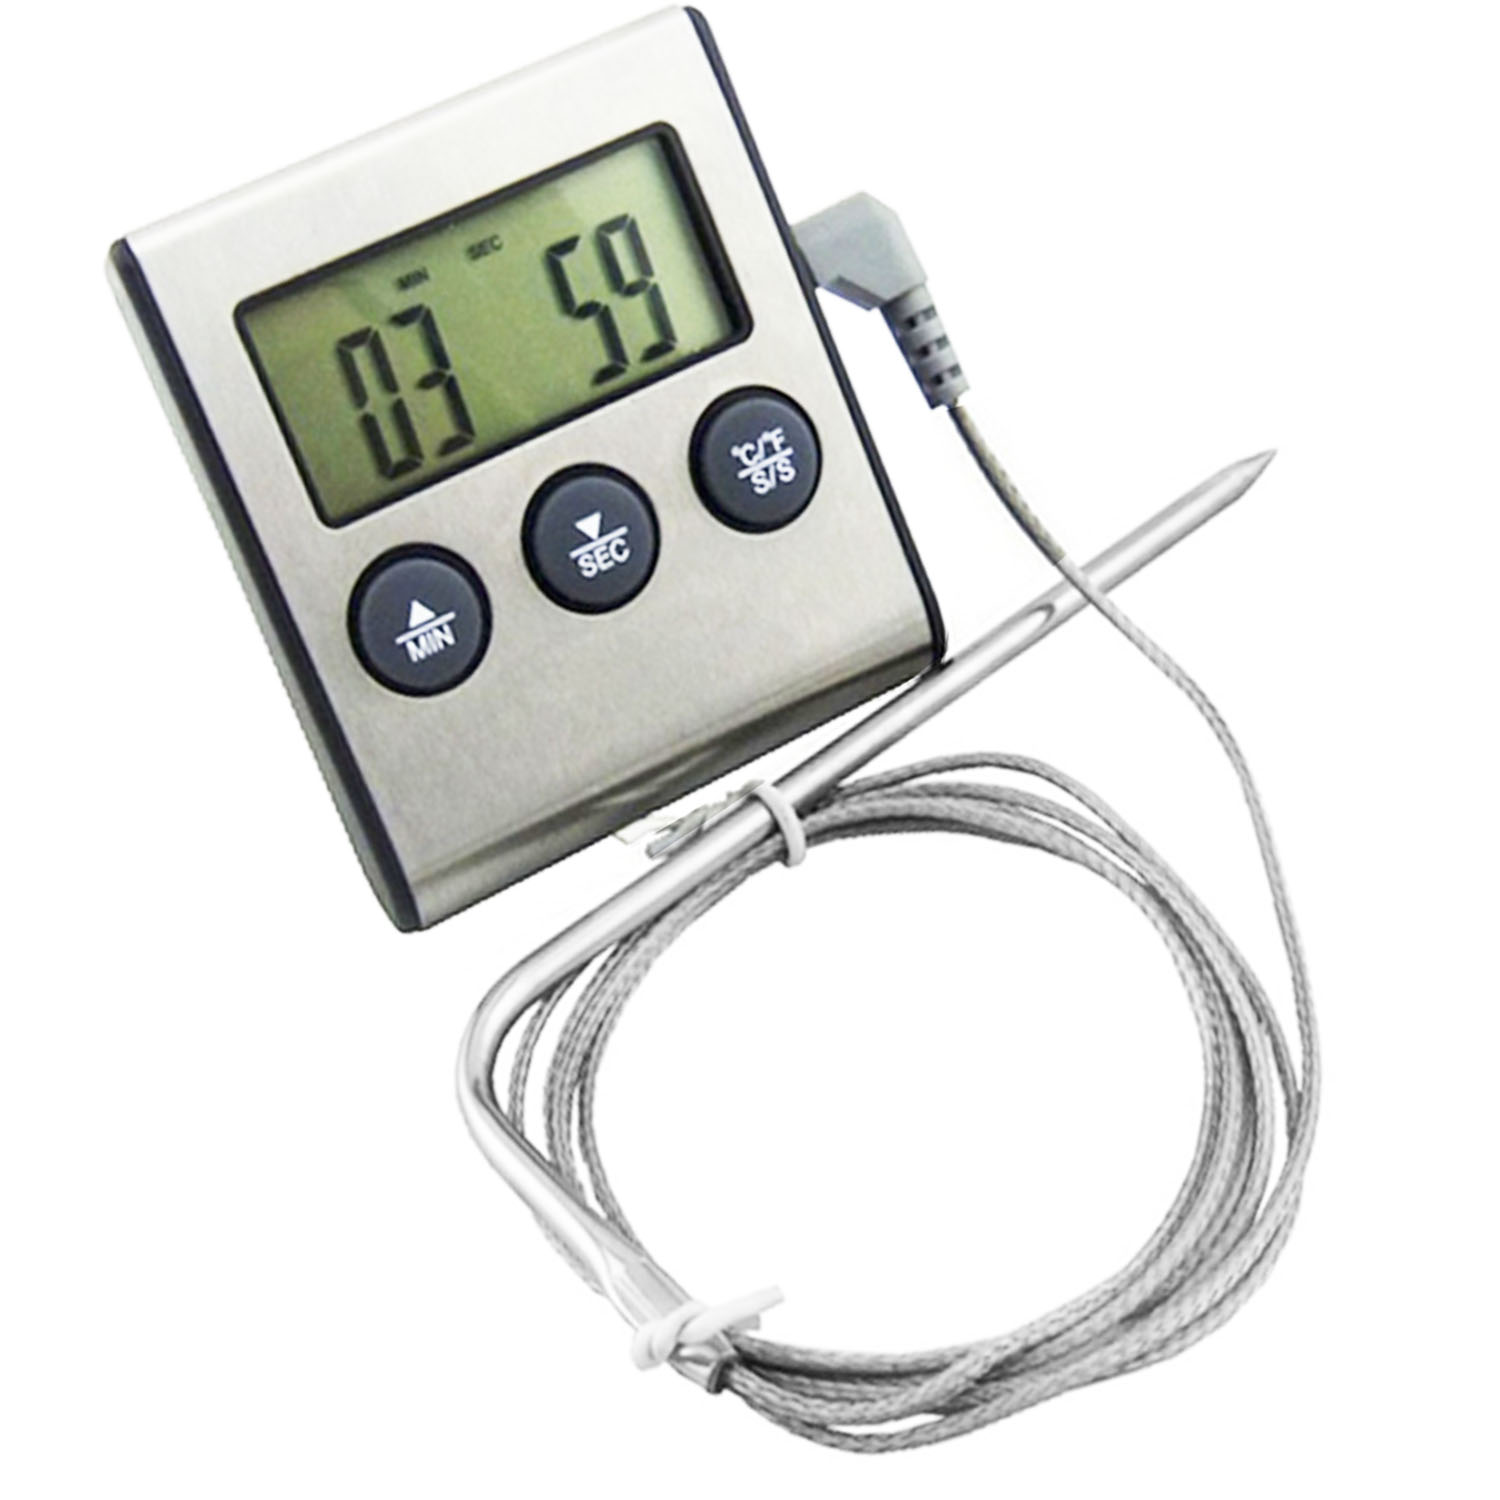 2-in-1 Oven Thermometer With Detachable Probe And Timer